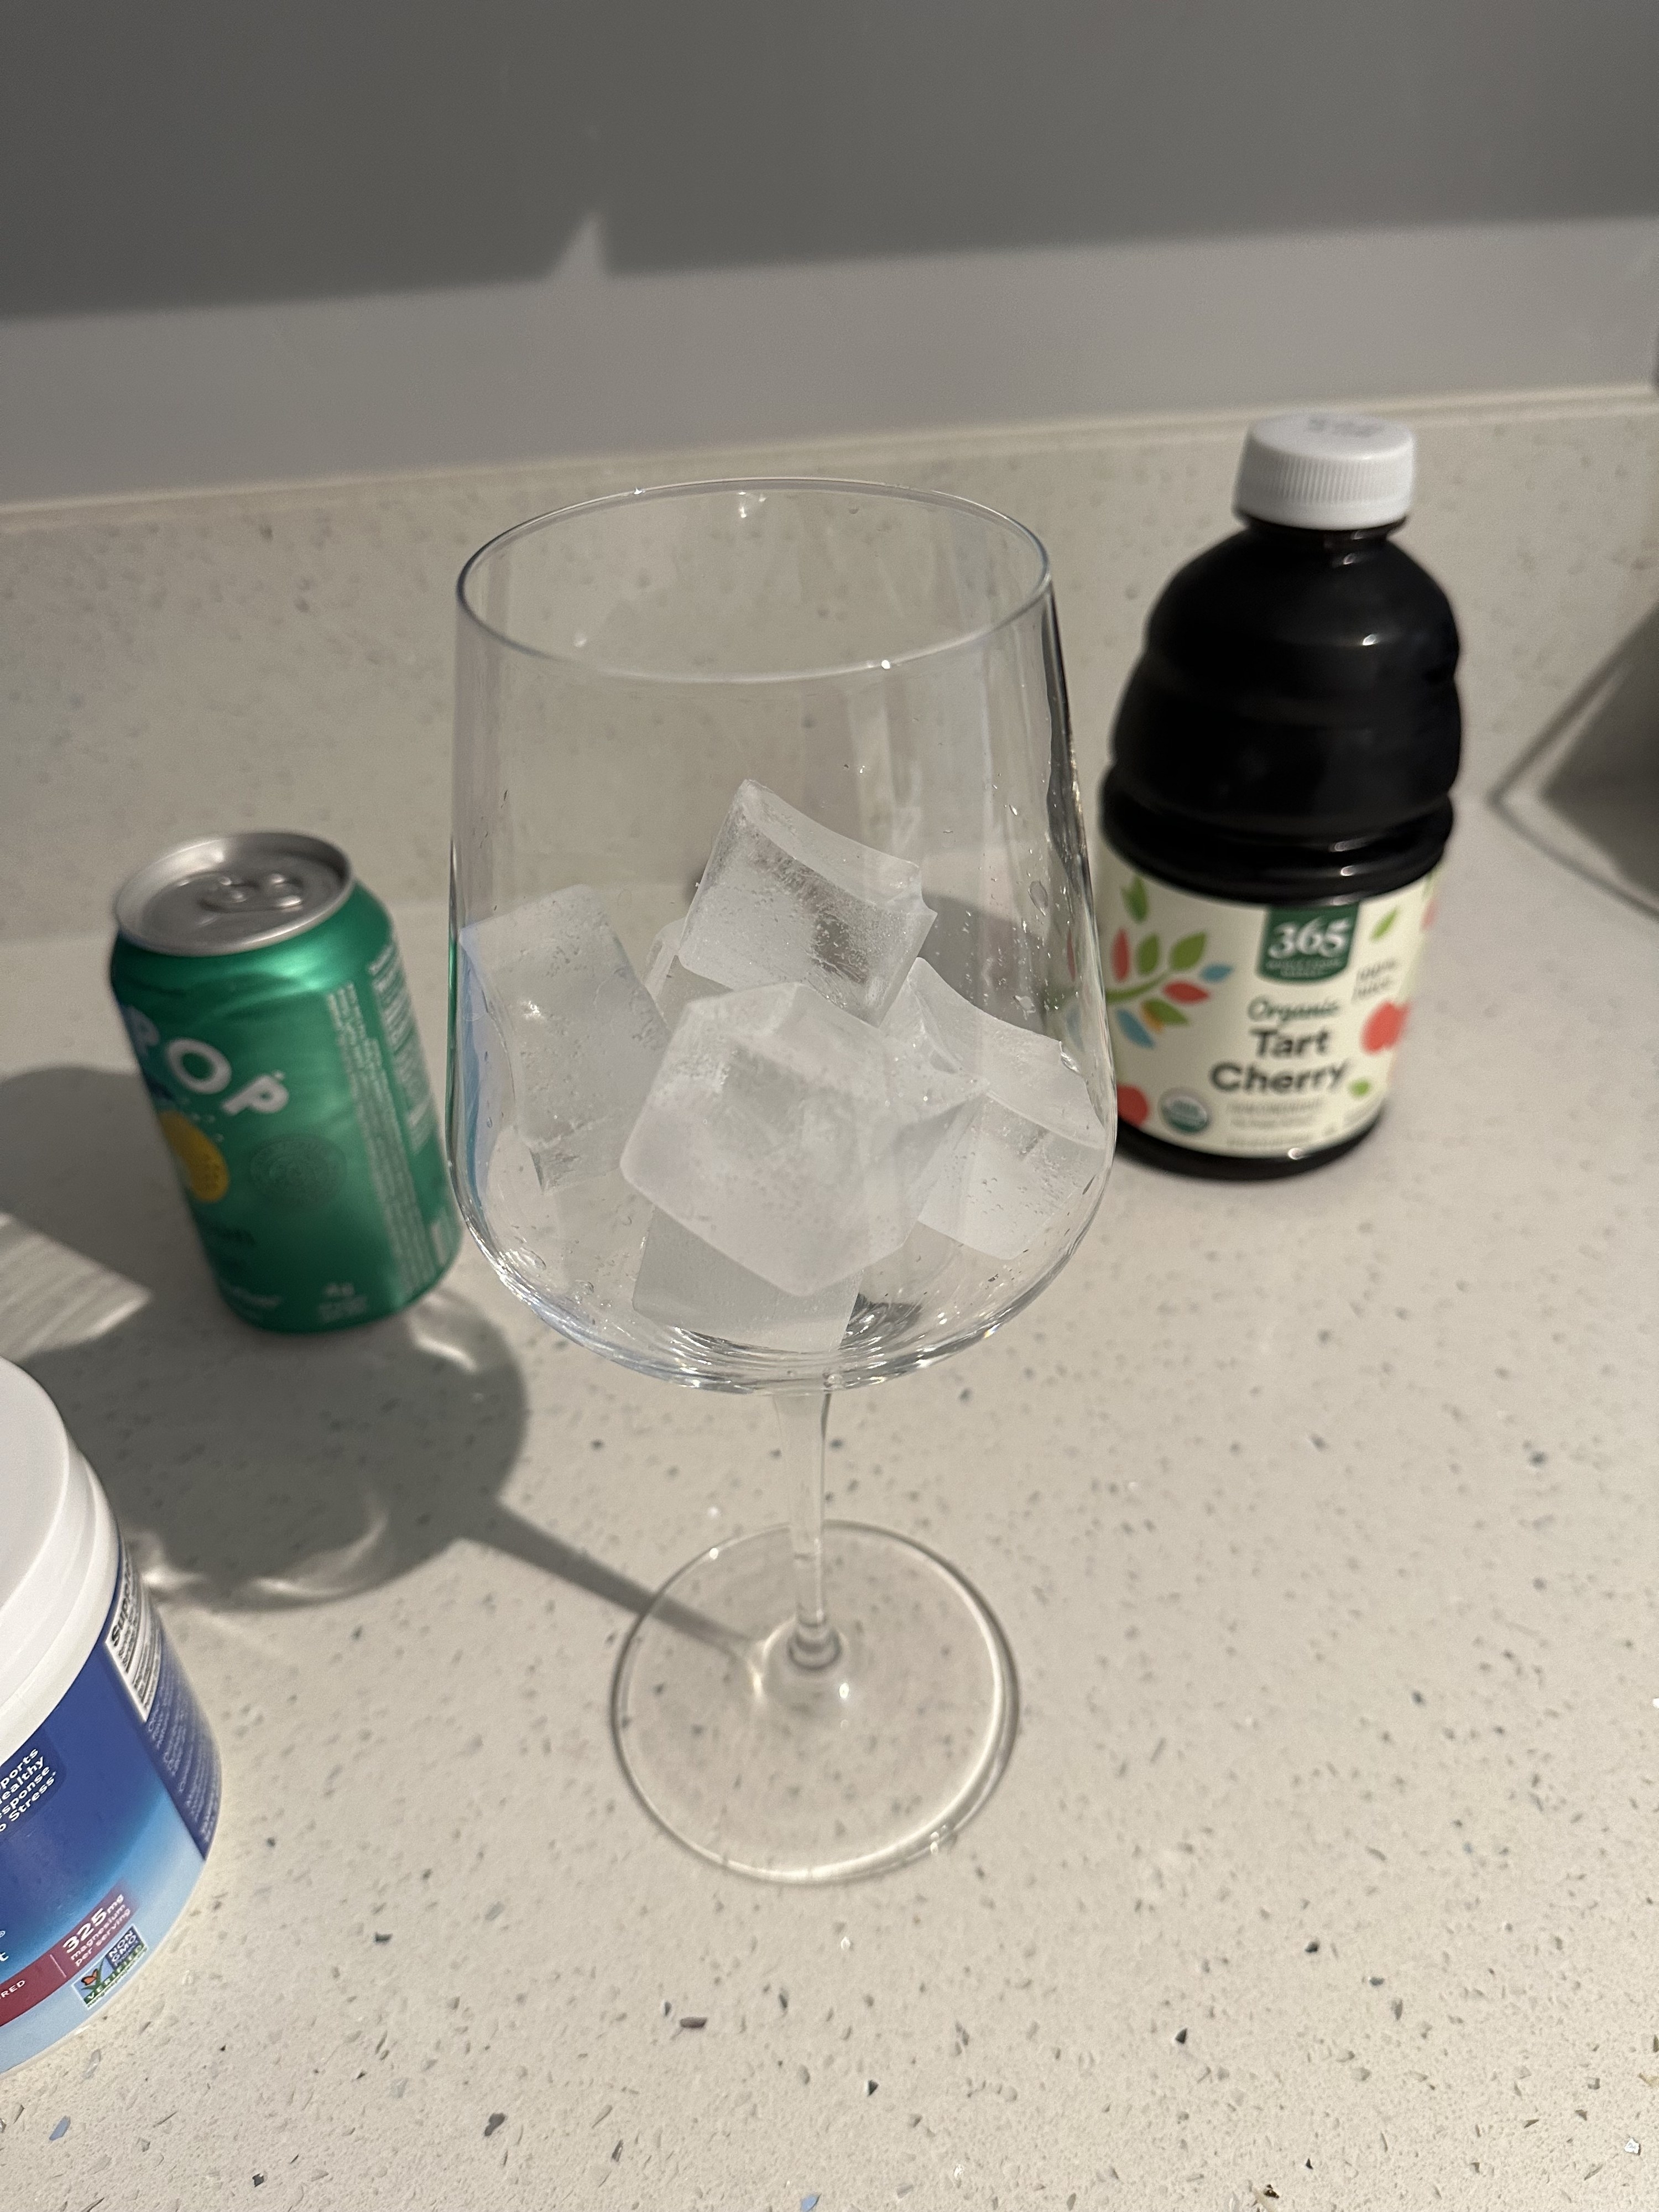 A wine glass with ice next to a bottle of tart cherry juice